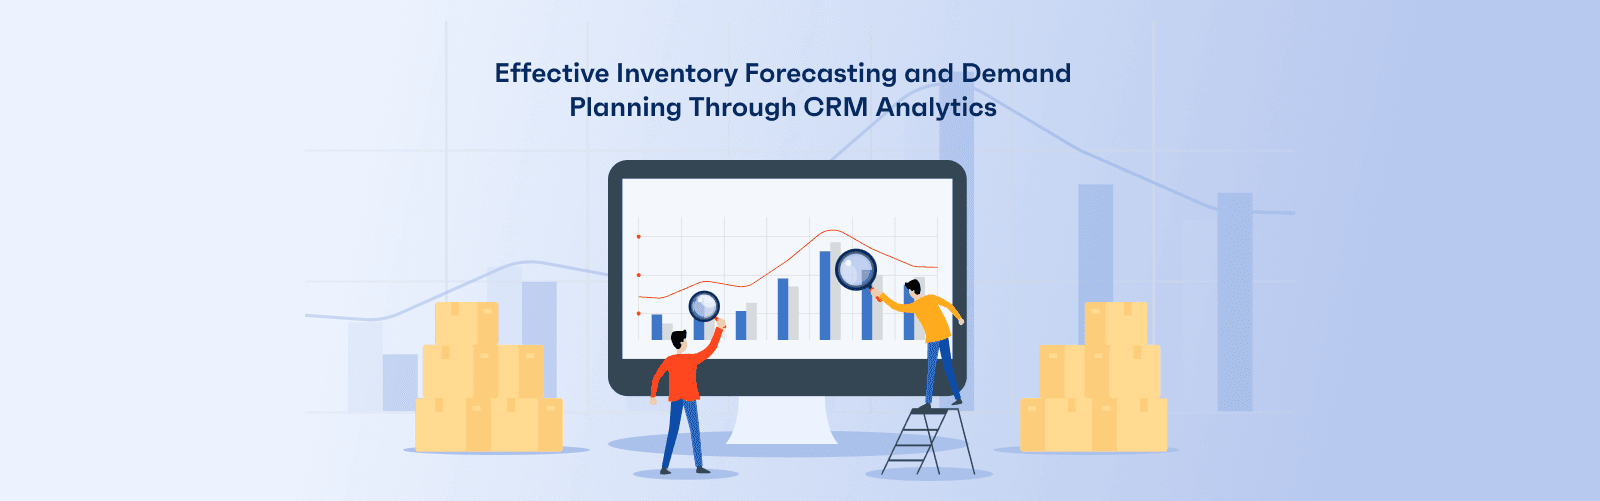 Effective Inventory Forecasting and Demand Planning Through CRM Analytics